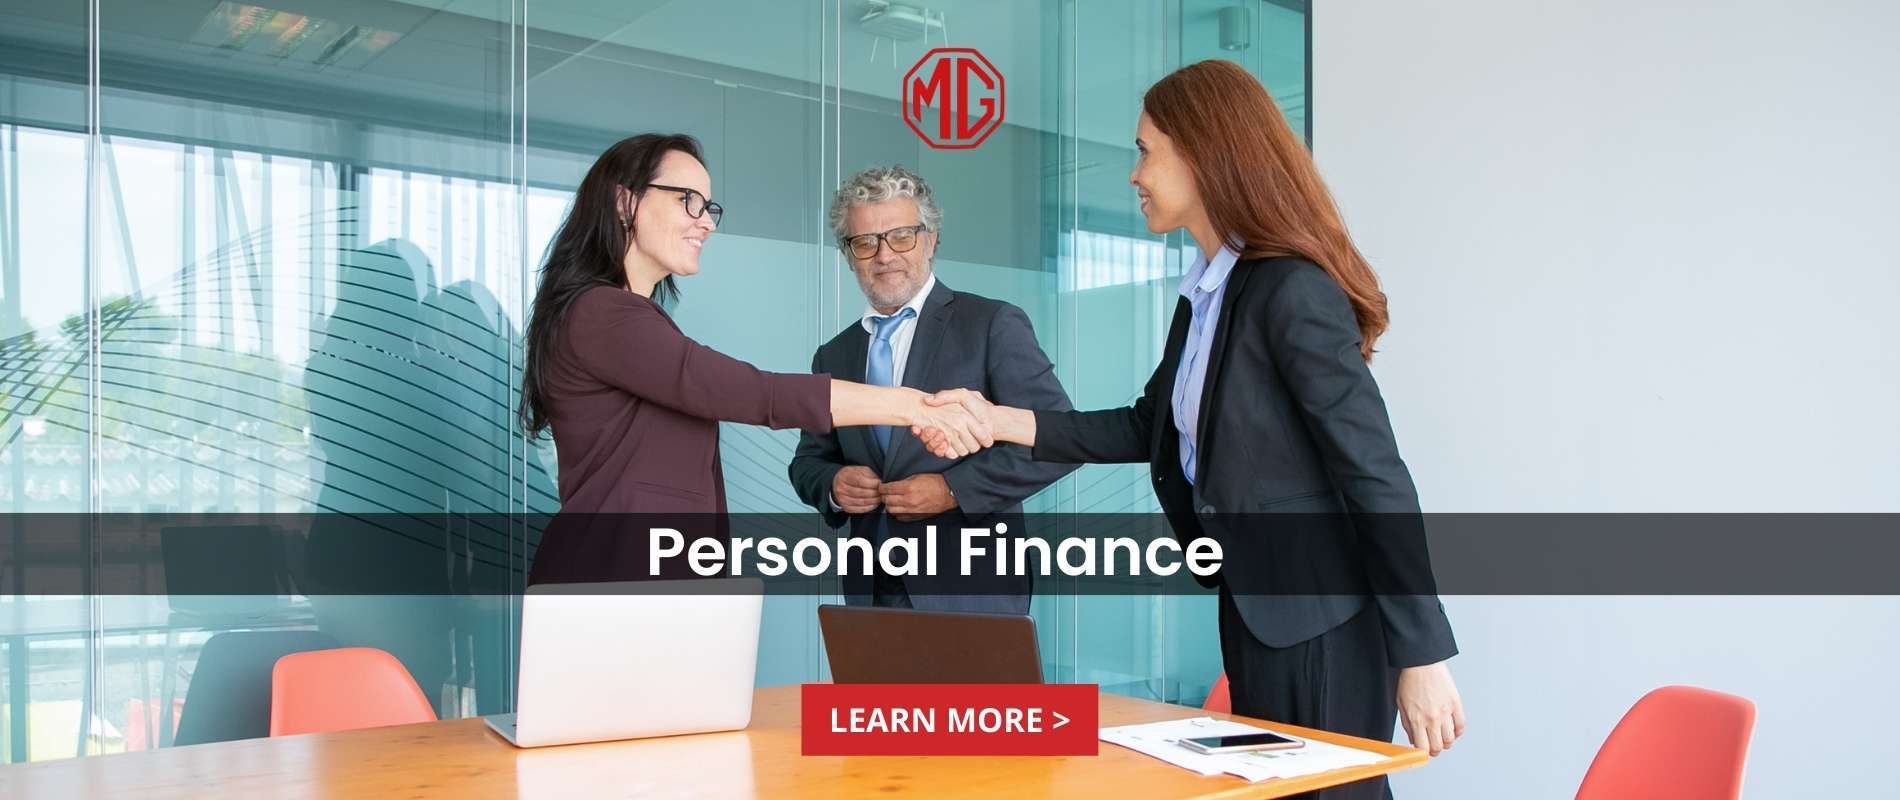 MG Finance Services